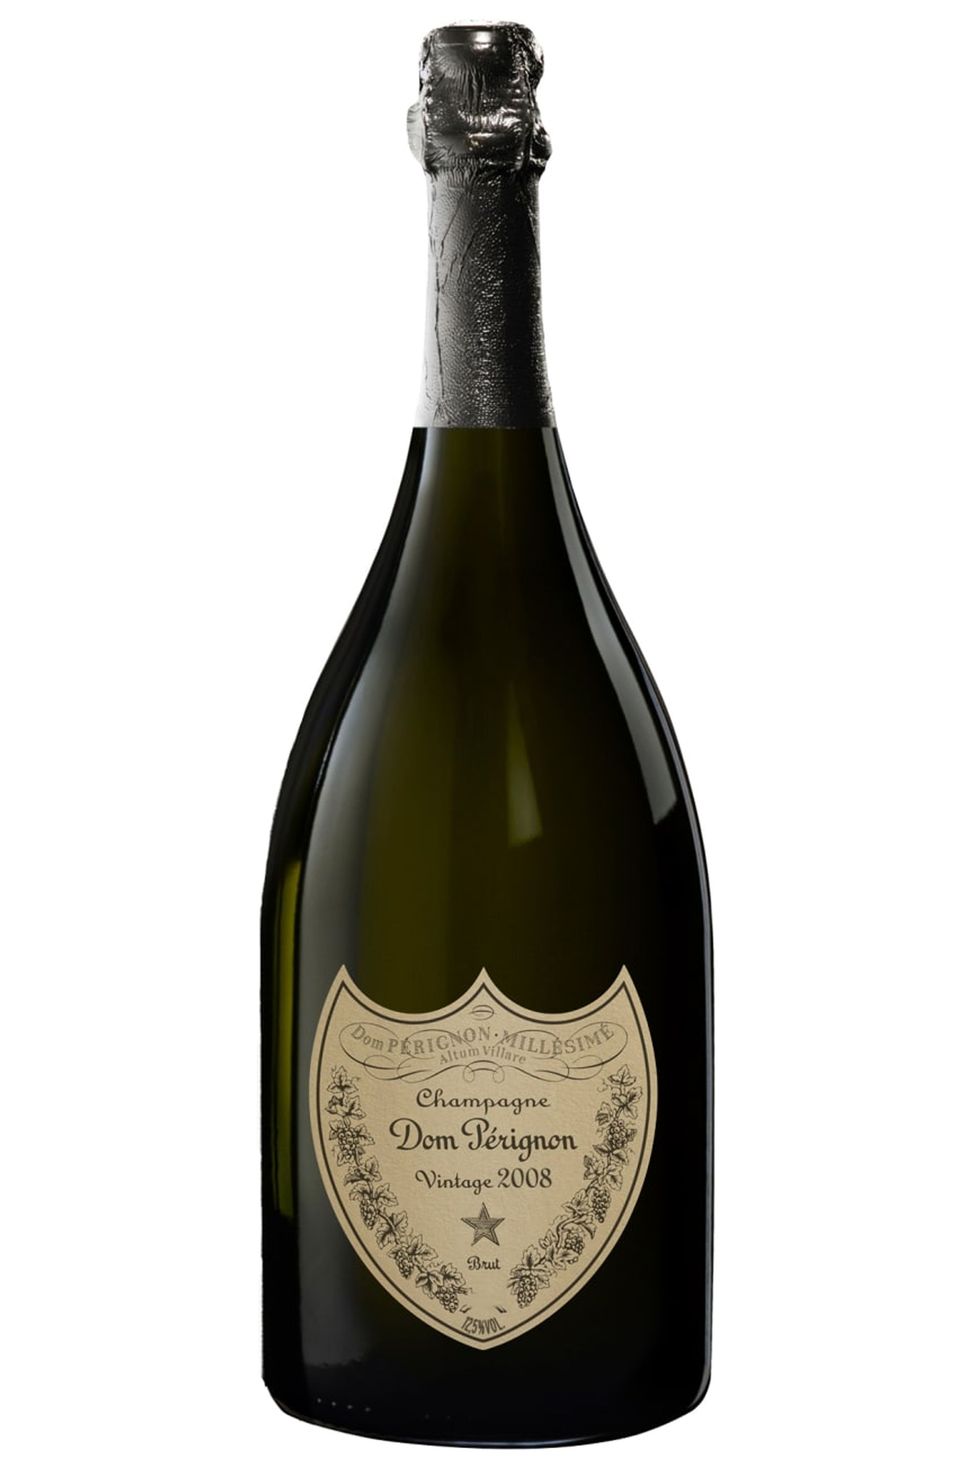 Moet and Chandon Rose Duo Champagne 750ml